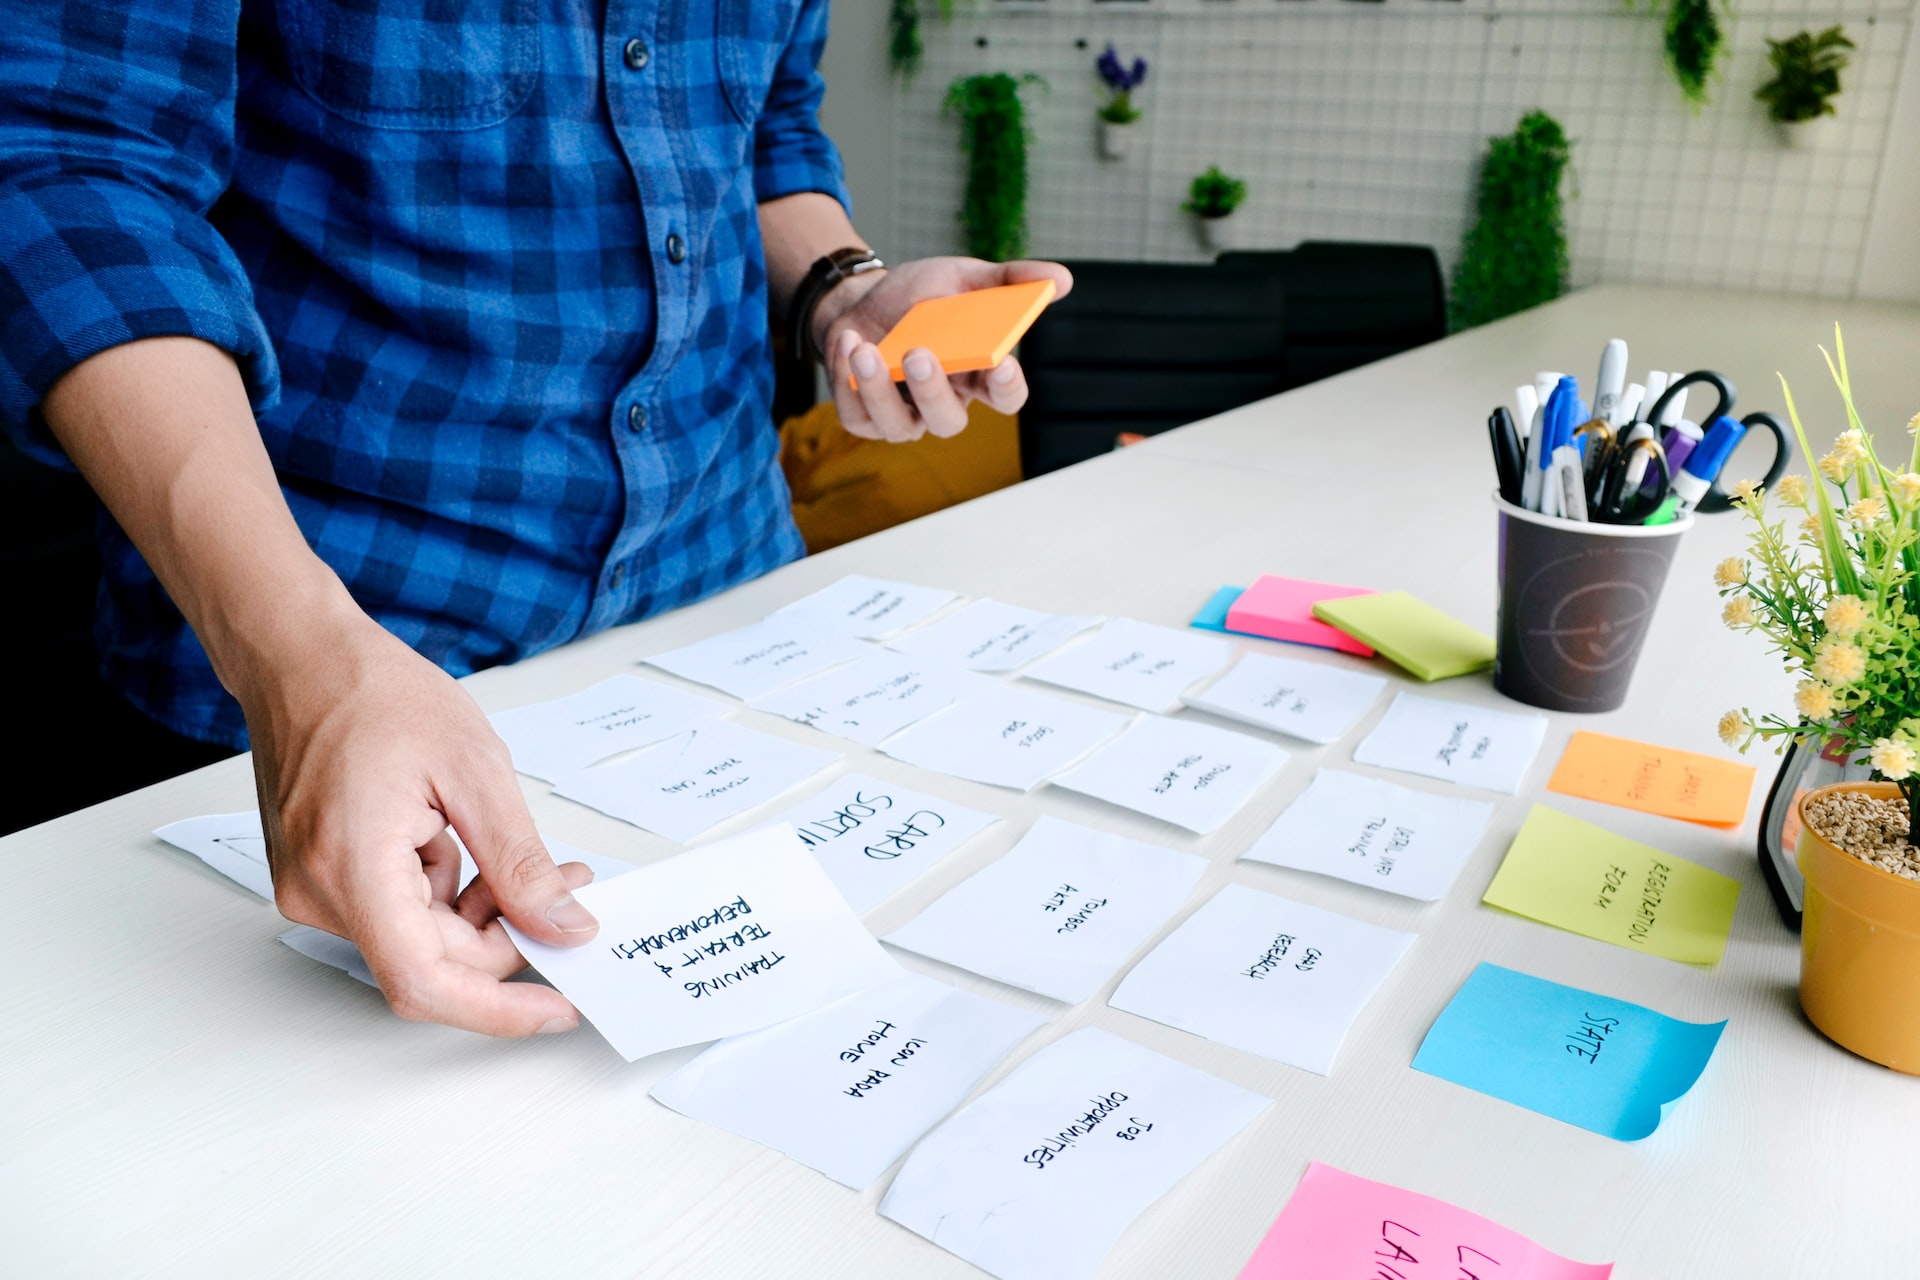 Designer performing UX research and organizes thoughts with post-its.